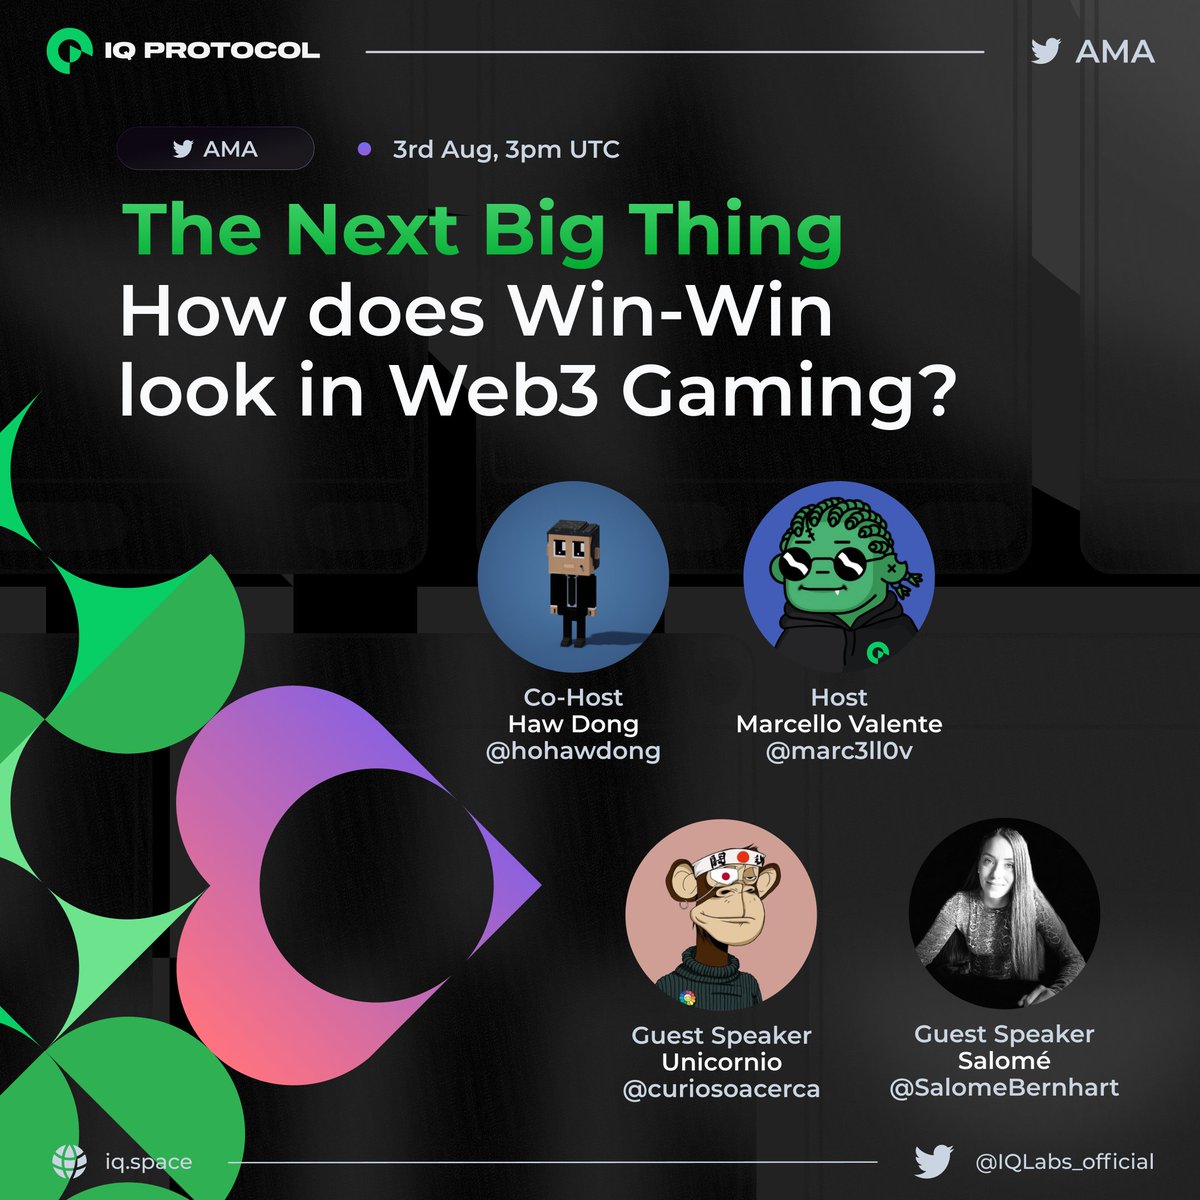 Join us Thursday August 3rd at 3pm UTC for 'The Next Big Thing' Twitter Spaces AMA, where we'll be joined by @SalomeBernhart & @curiosoacerca 🔥 We'll discuss how #Web3Gaming can benefit from their Play-to-Market model, Win-Win Design, & much more 👇 x.com/i/spaces/1yqkd…